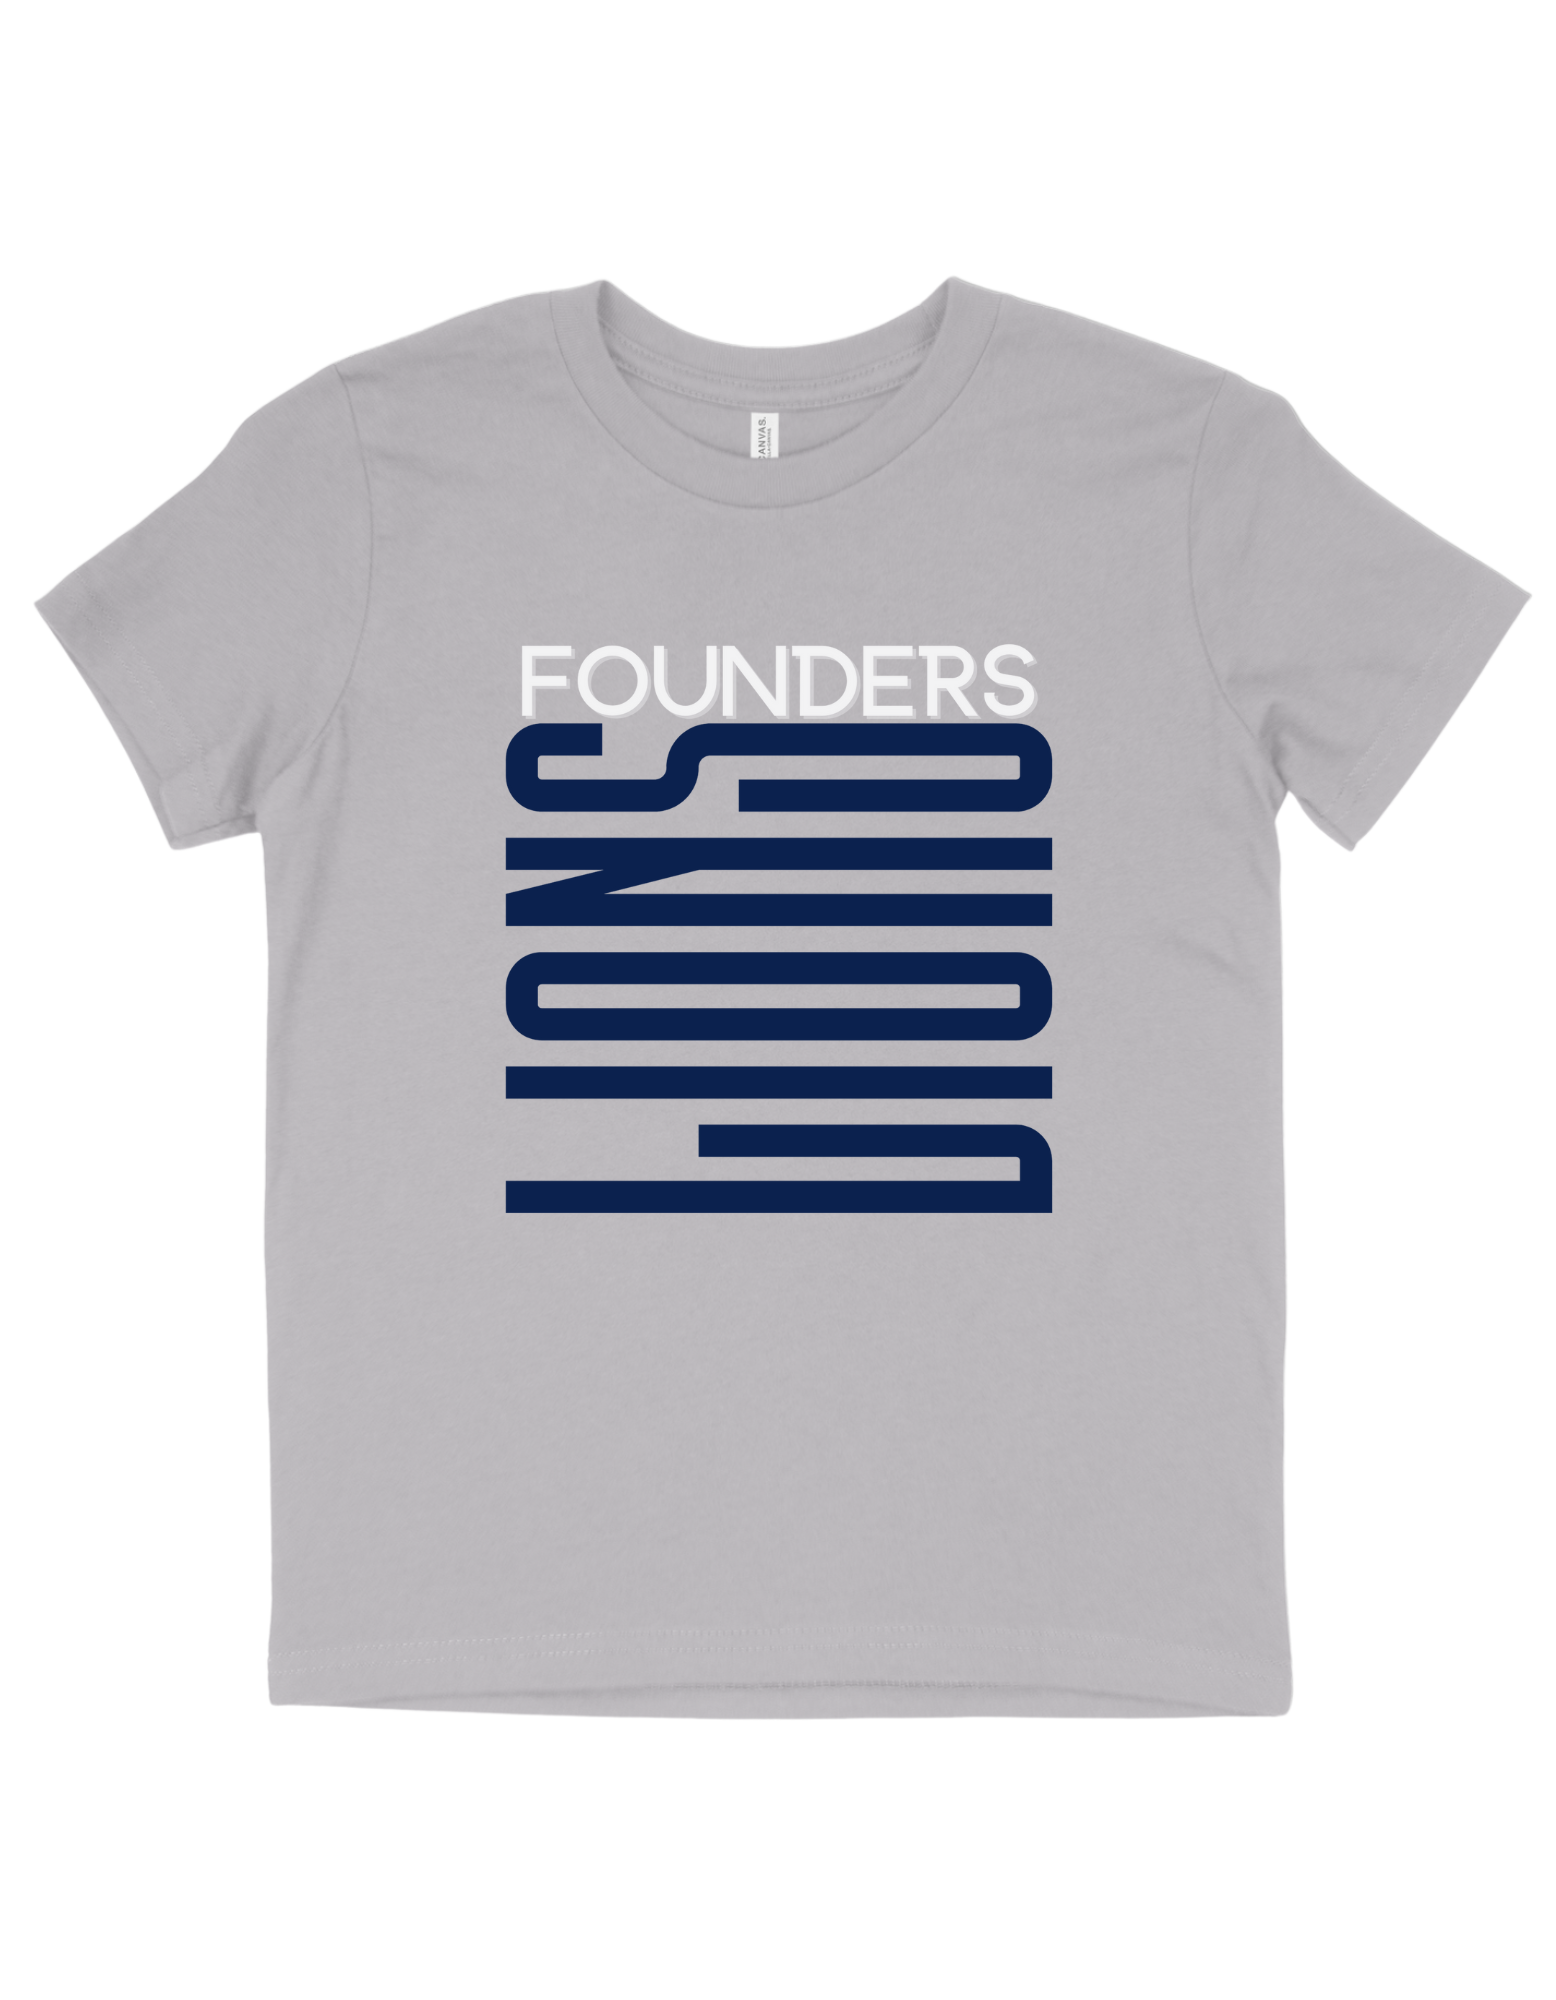 Founders Lions - Athletic Heather Large Image